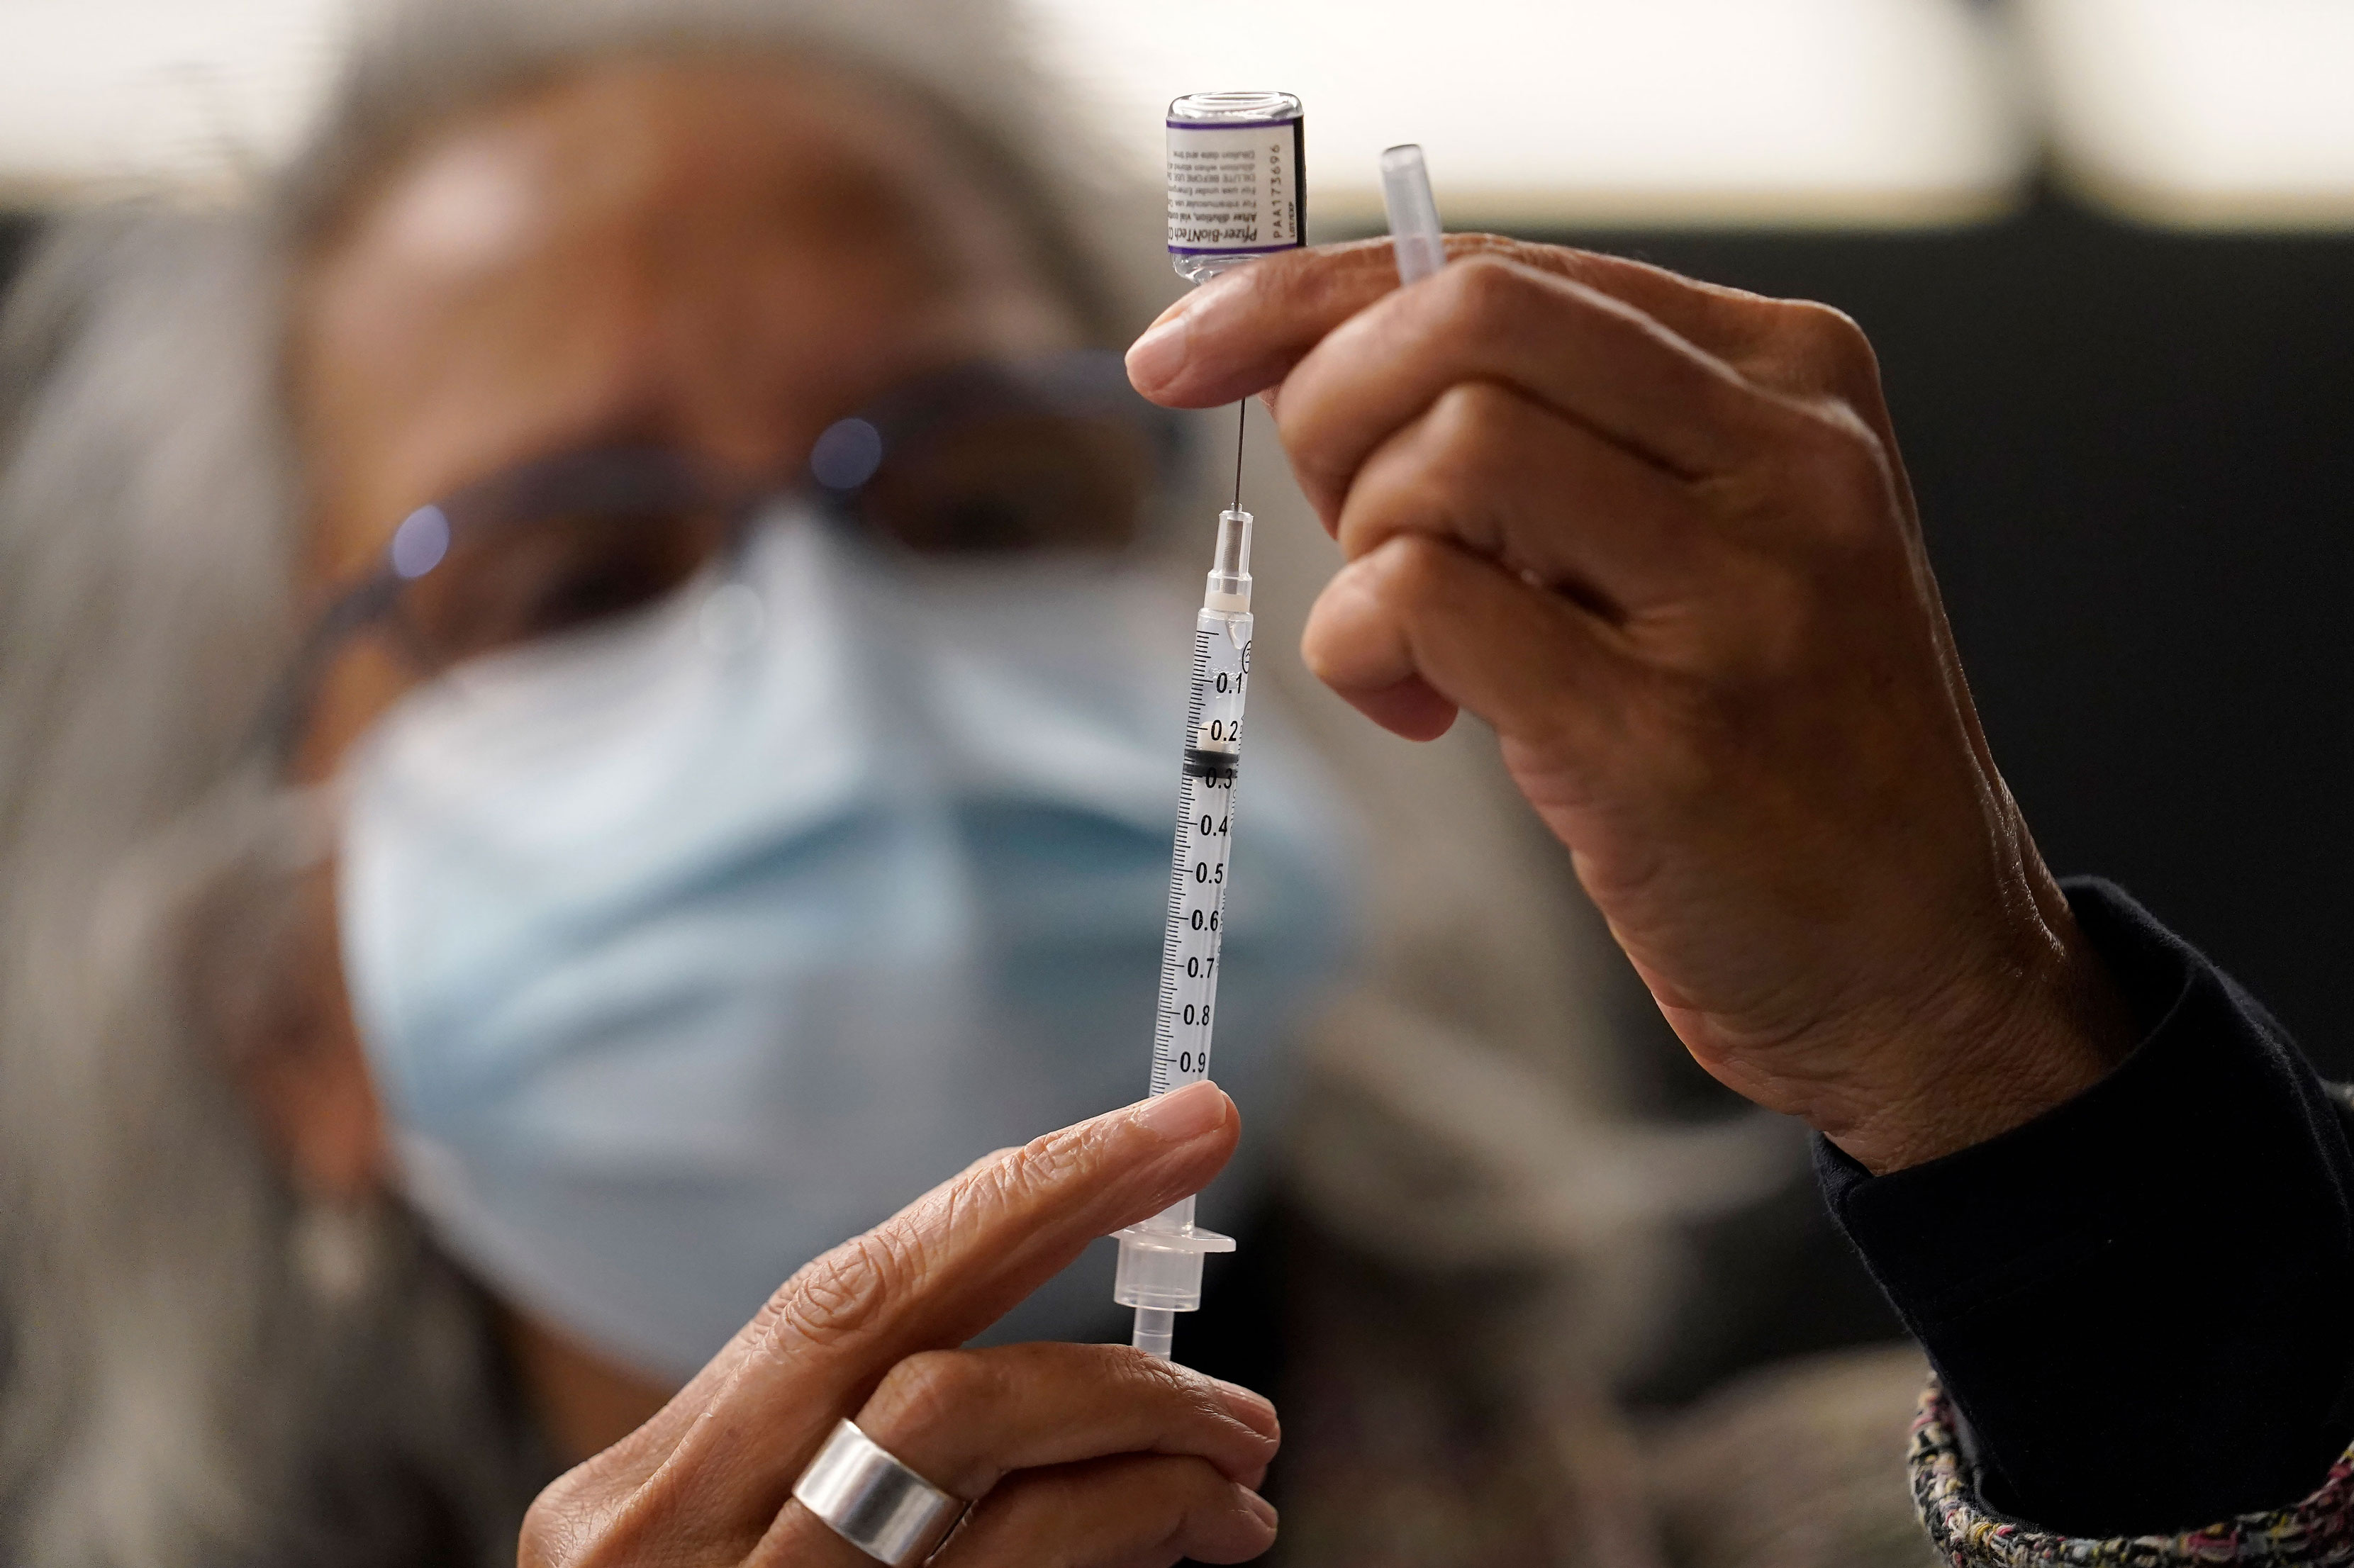 Dr. Manjul Shukla transfers Pfizer COVID-19 vaccine into a syringe on Thursday, Dec. 2, 2021, at a mobile vaccination clinic in Worcester, Massachusetts.